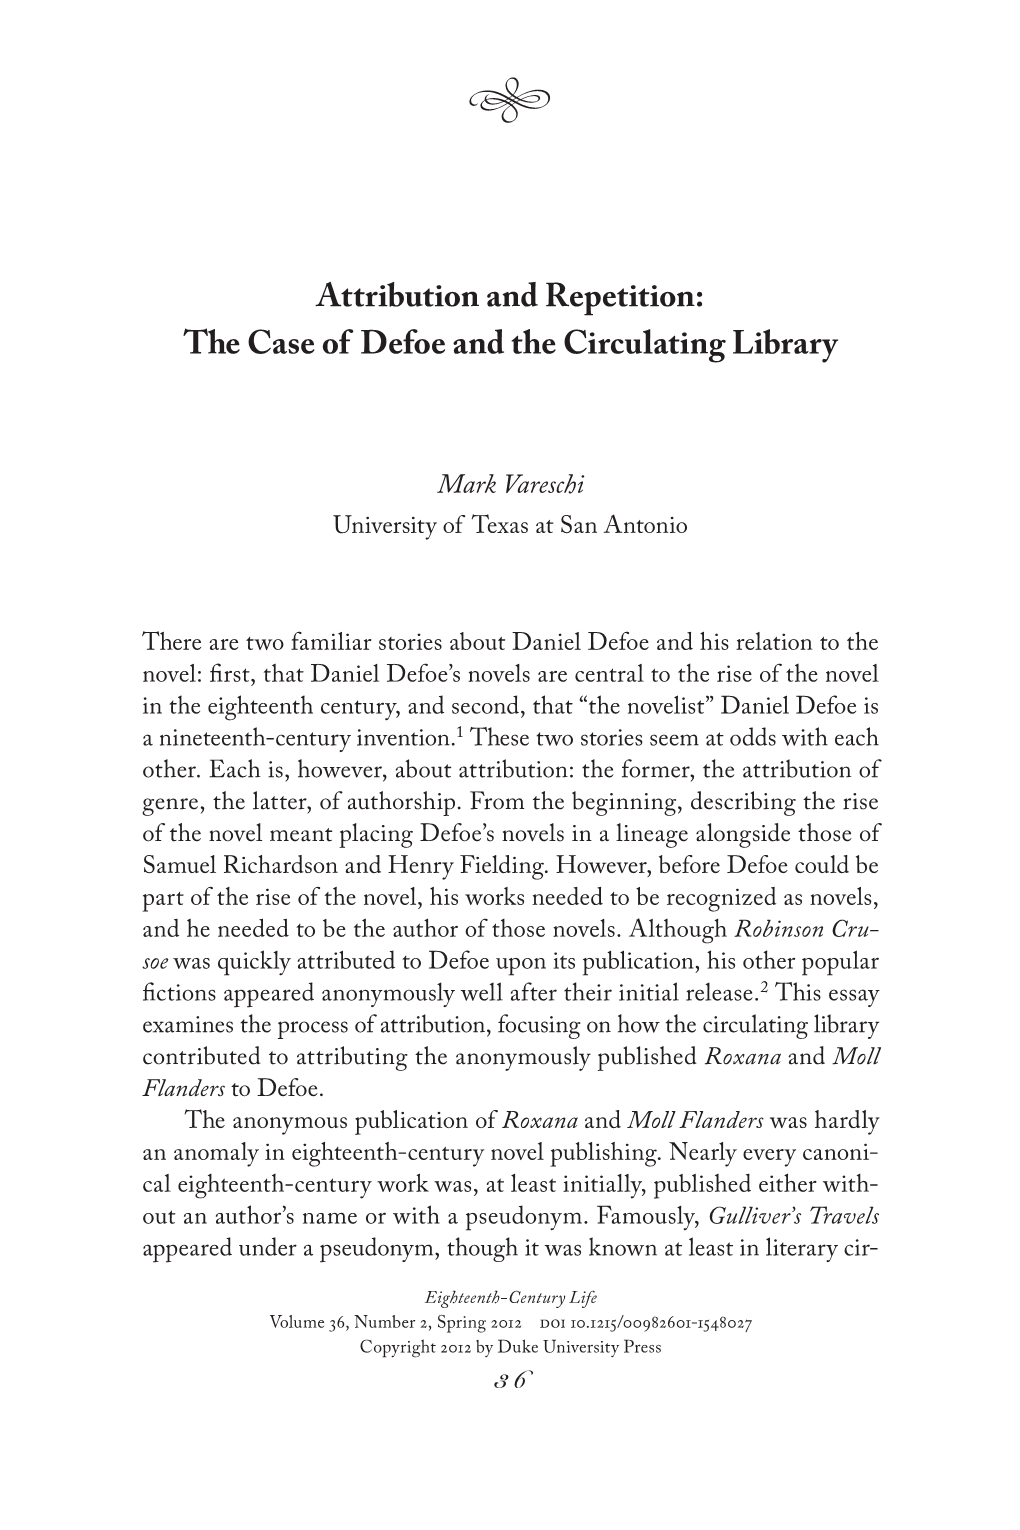 Attribution and Repetition: the Case of Defoe and the Circulating Library